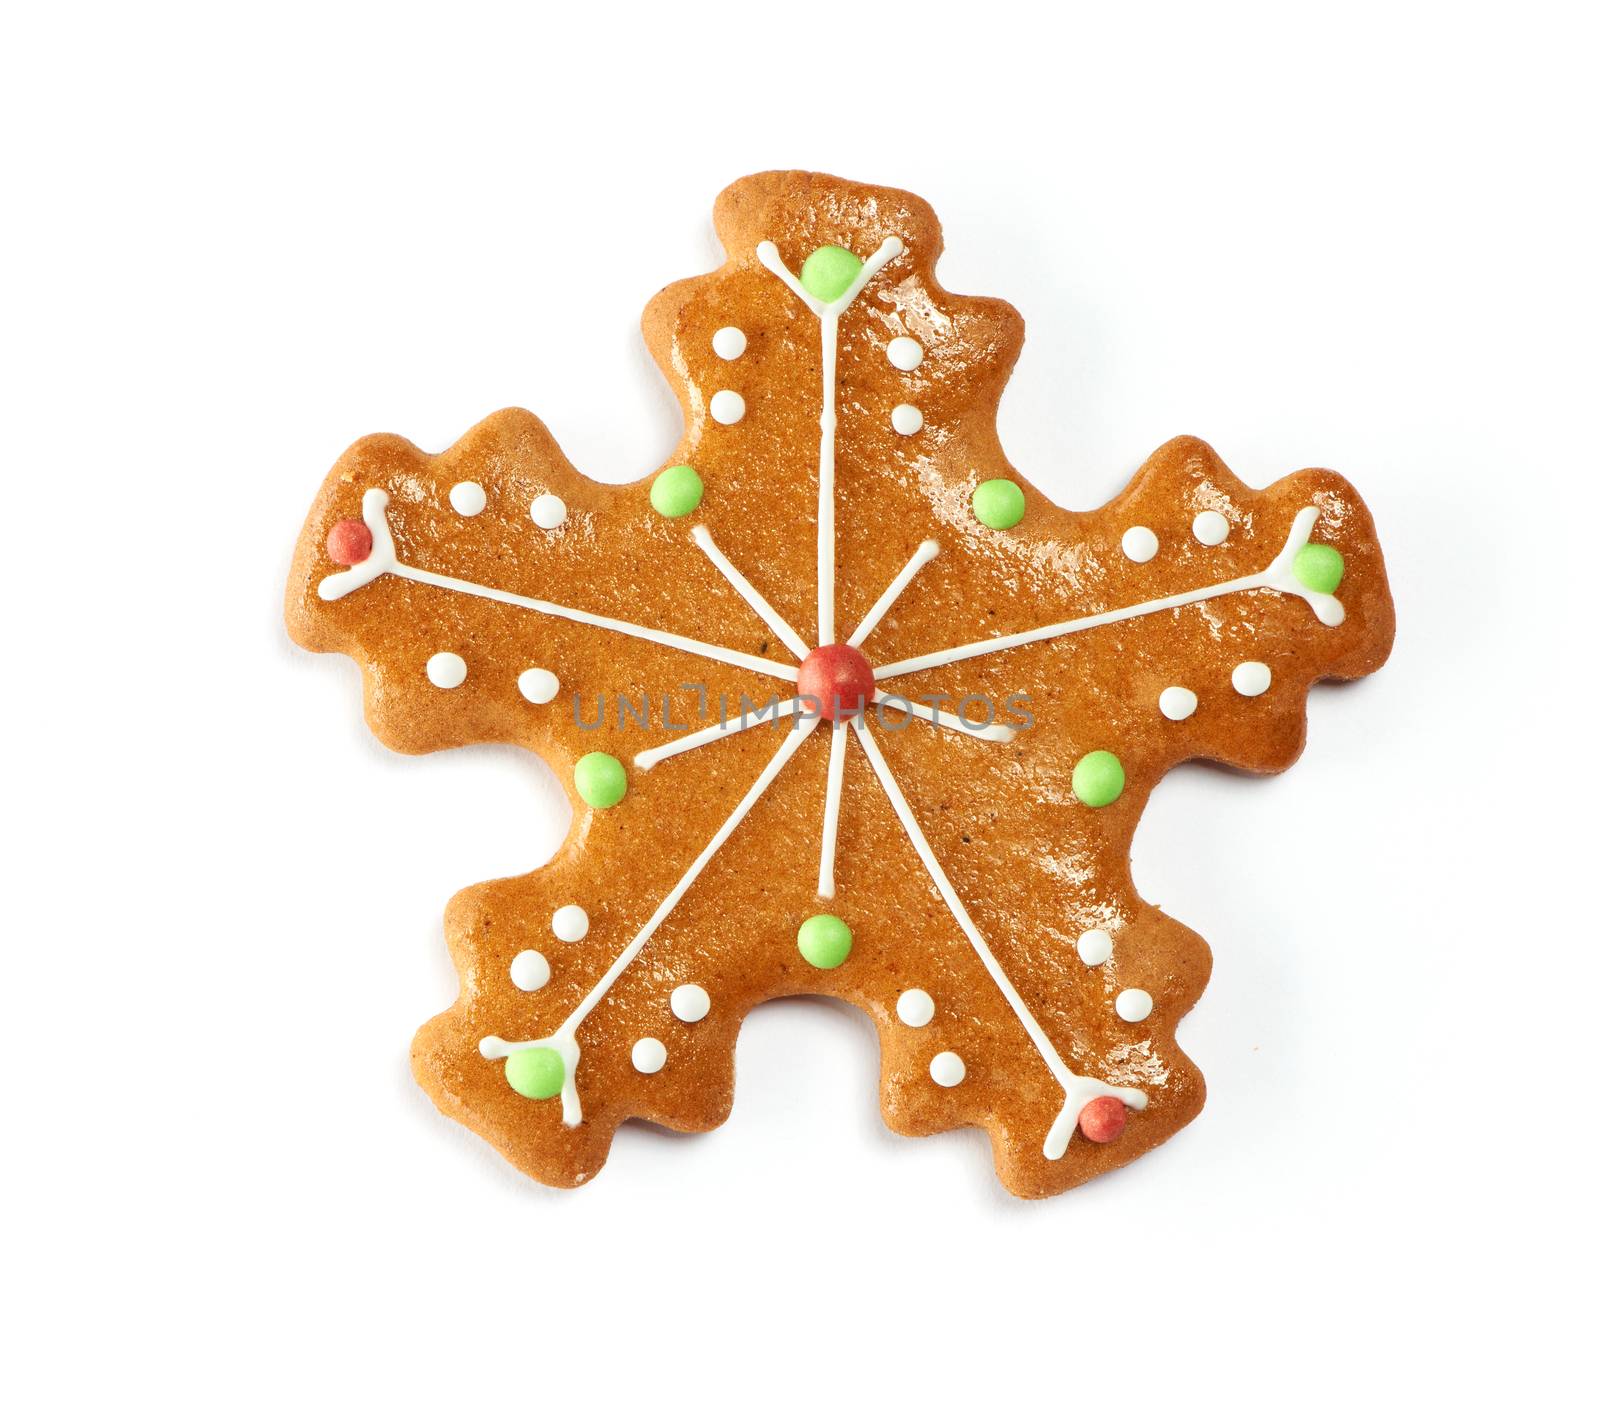 Christmas gingerbread cookie by haveseen